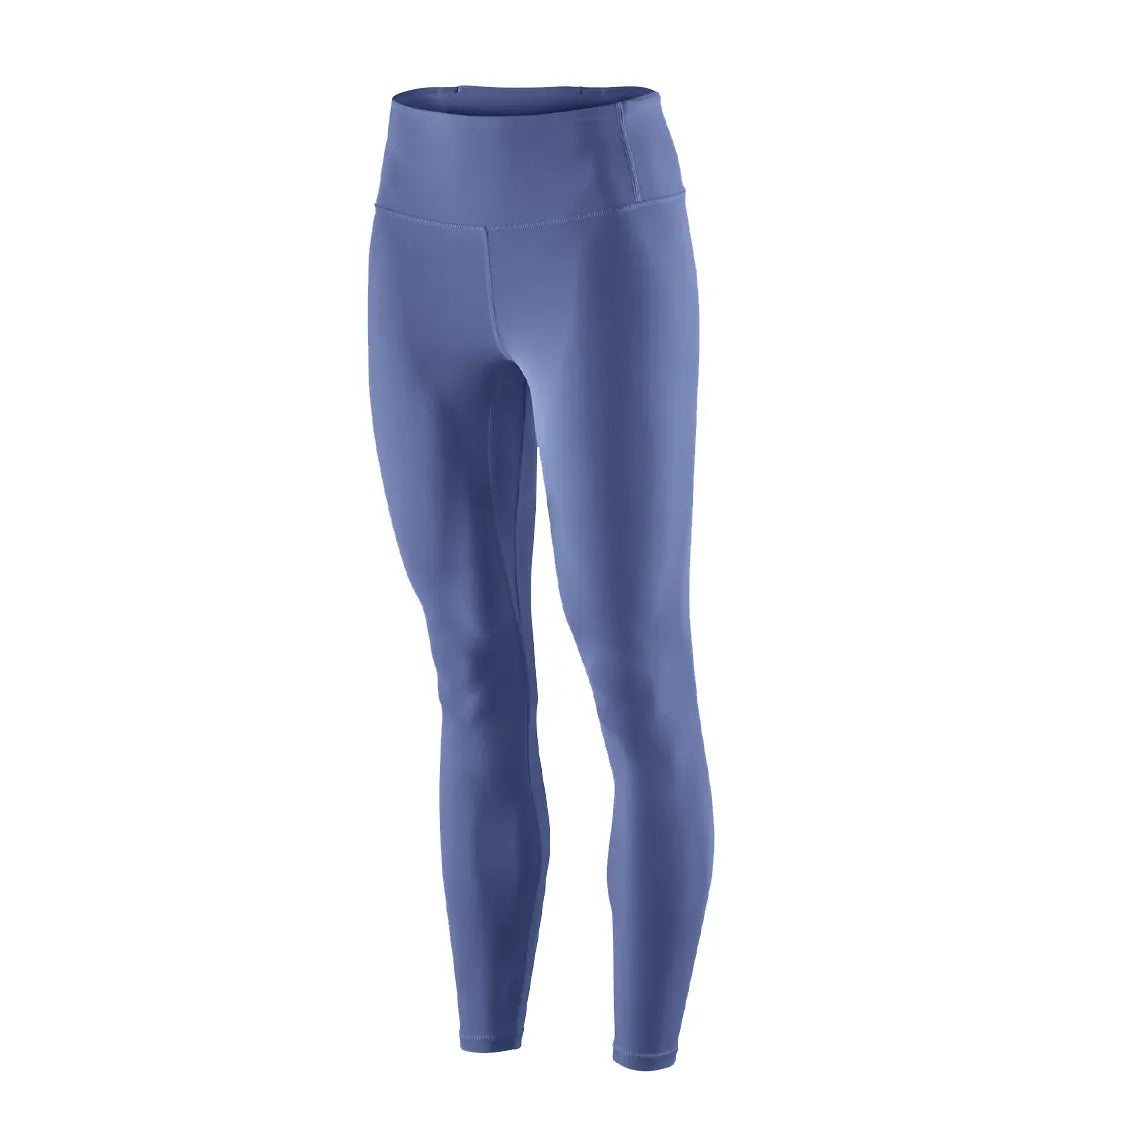 Womens Patagonia Maipo 7/8 Tights - Current Blue